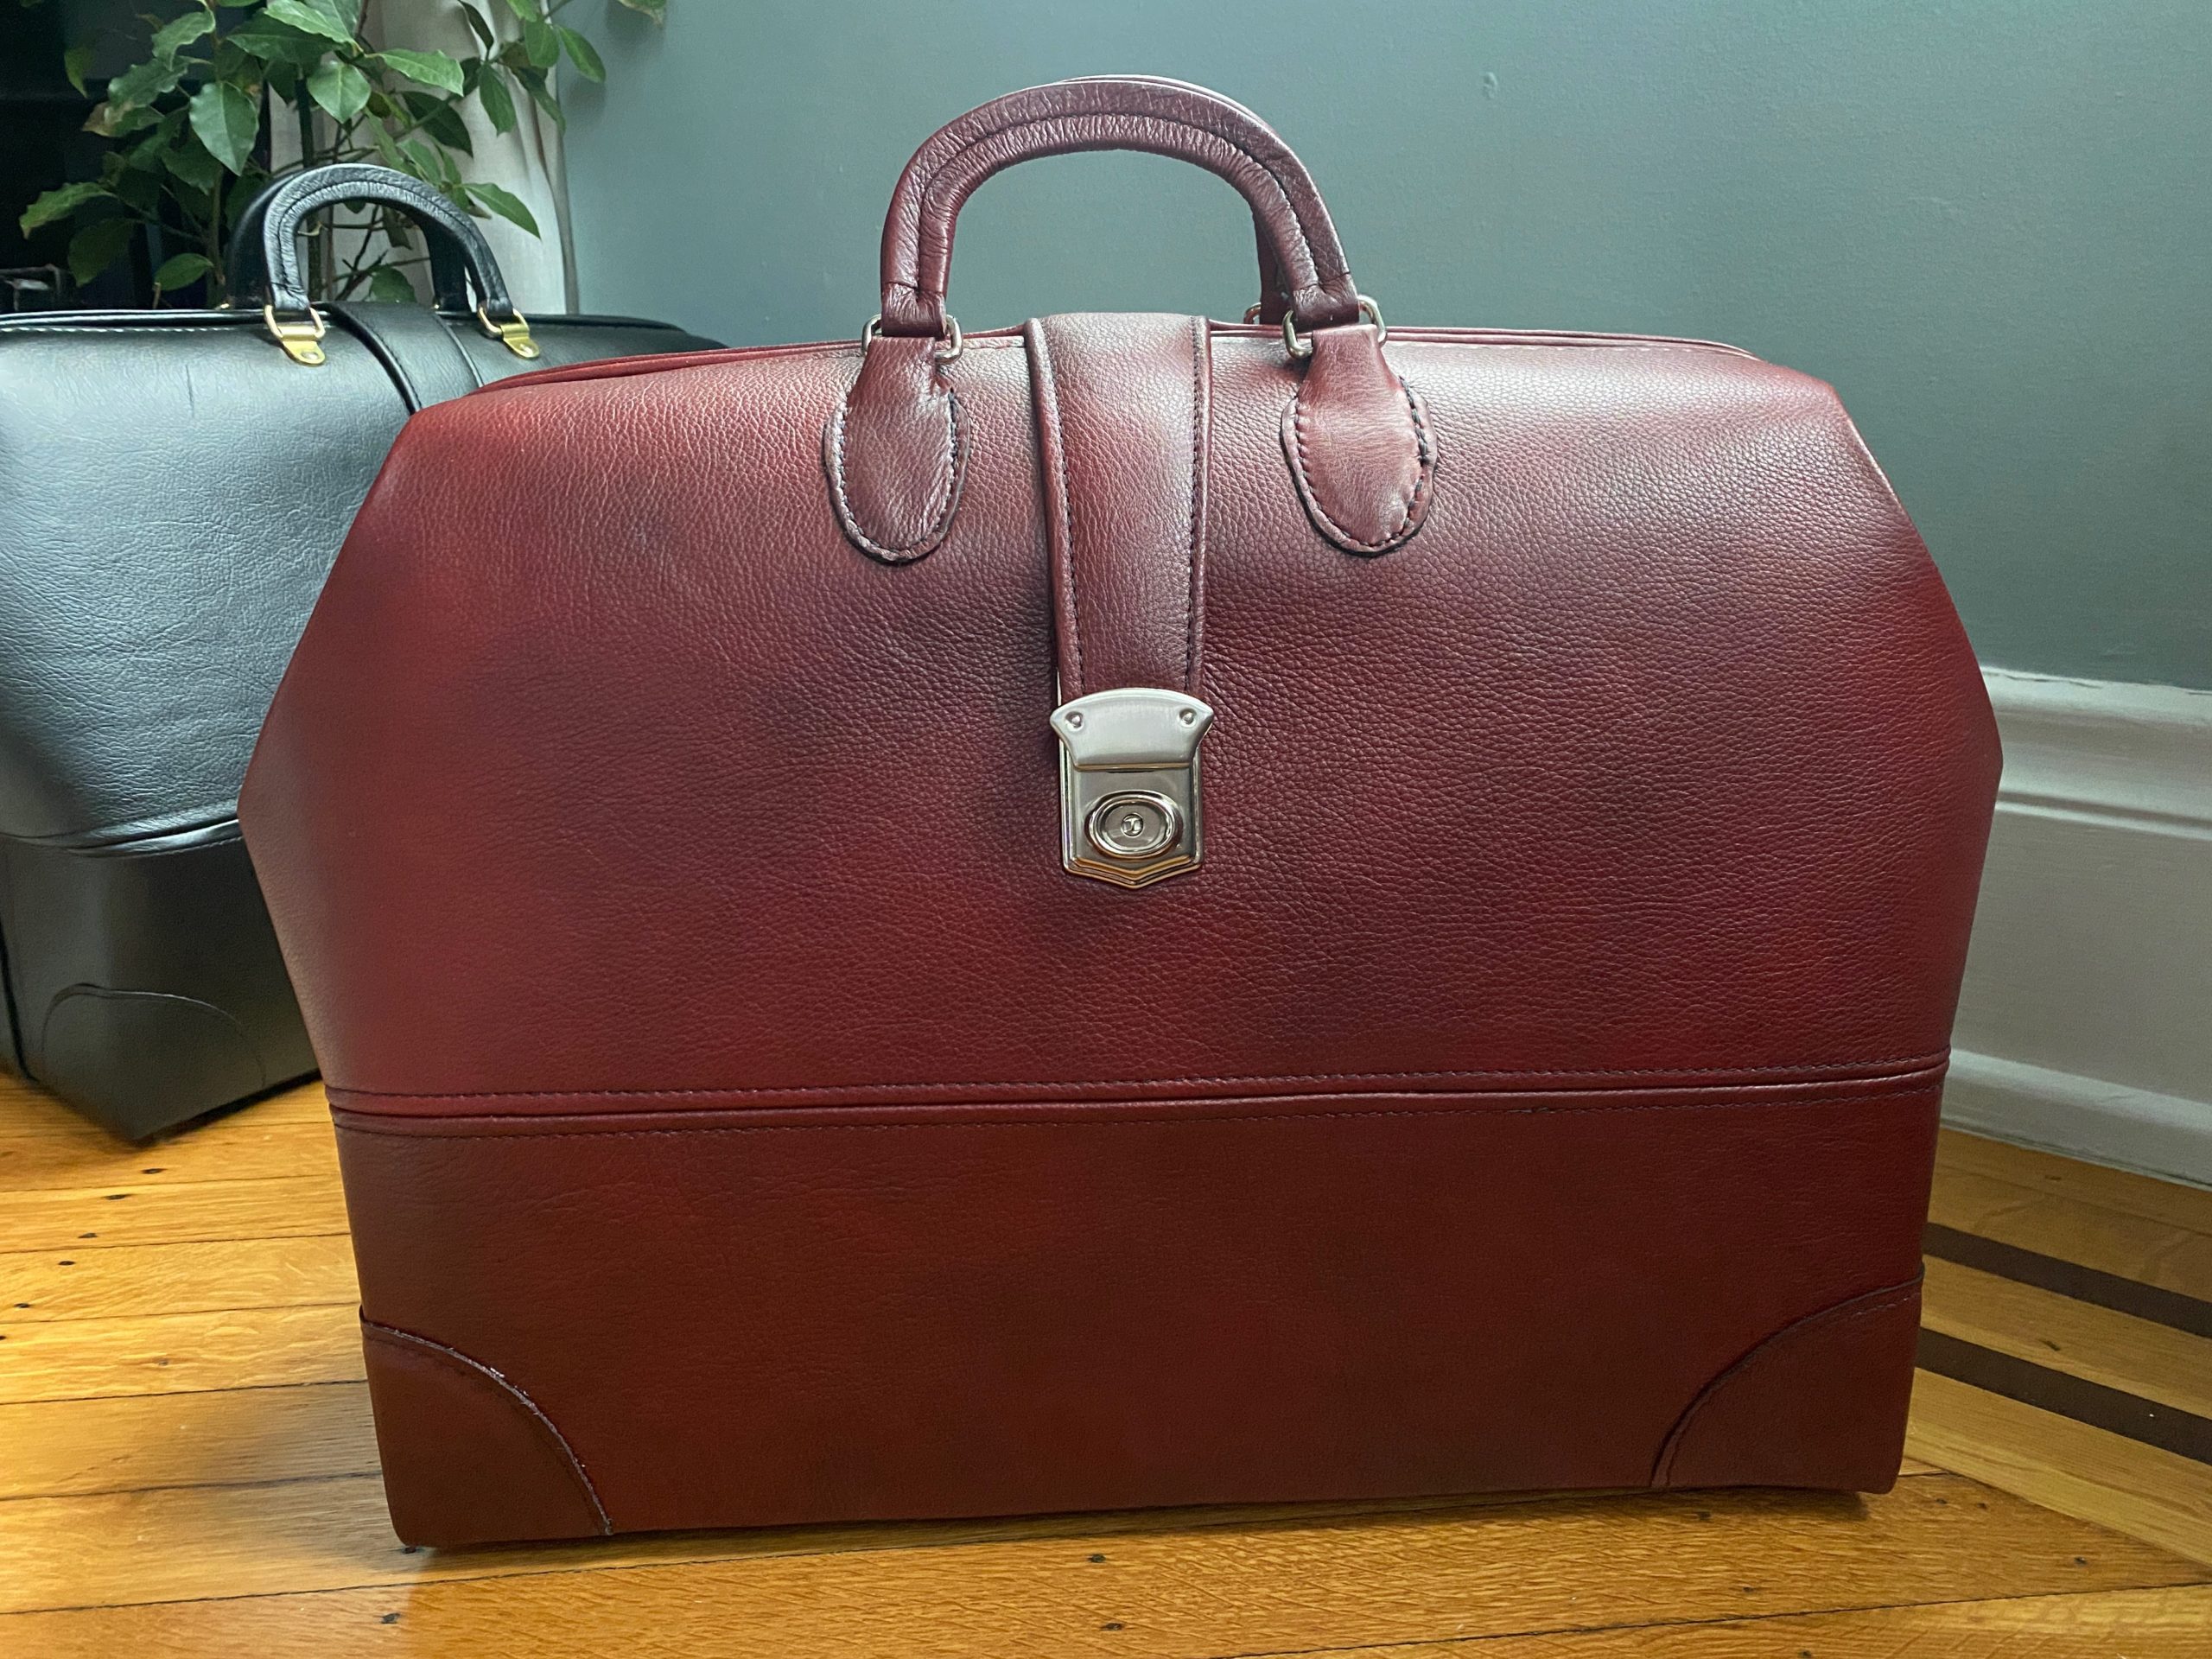 Professional Case - Leather Intern Student Line Doctor Bag - Medium (14 x  5 x 8) - Brown Pebble Leather